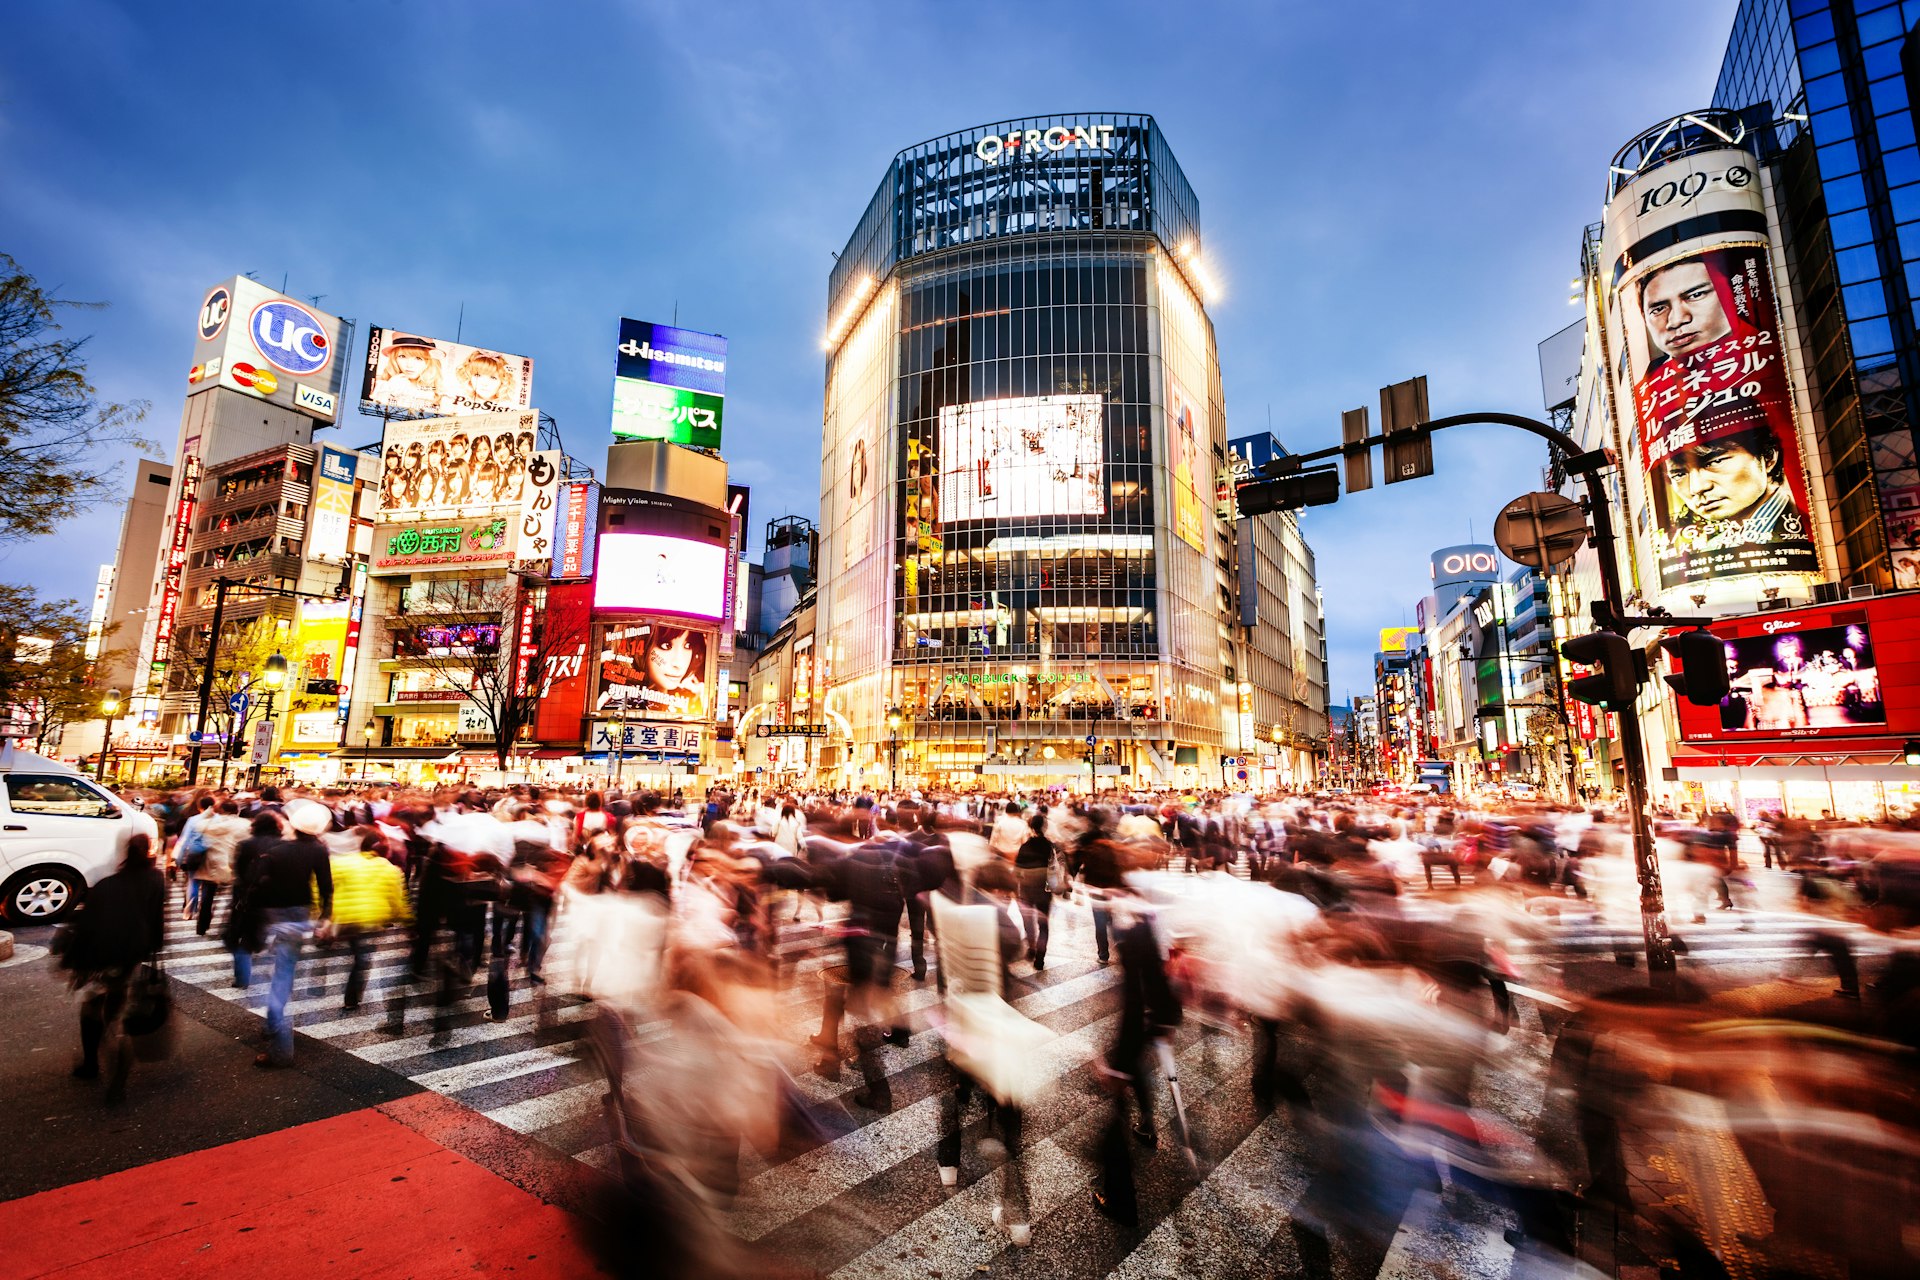 Long exposure of pedestrians crossing the famous Shibuya Crossing in Tokyo at dusk.